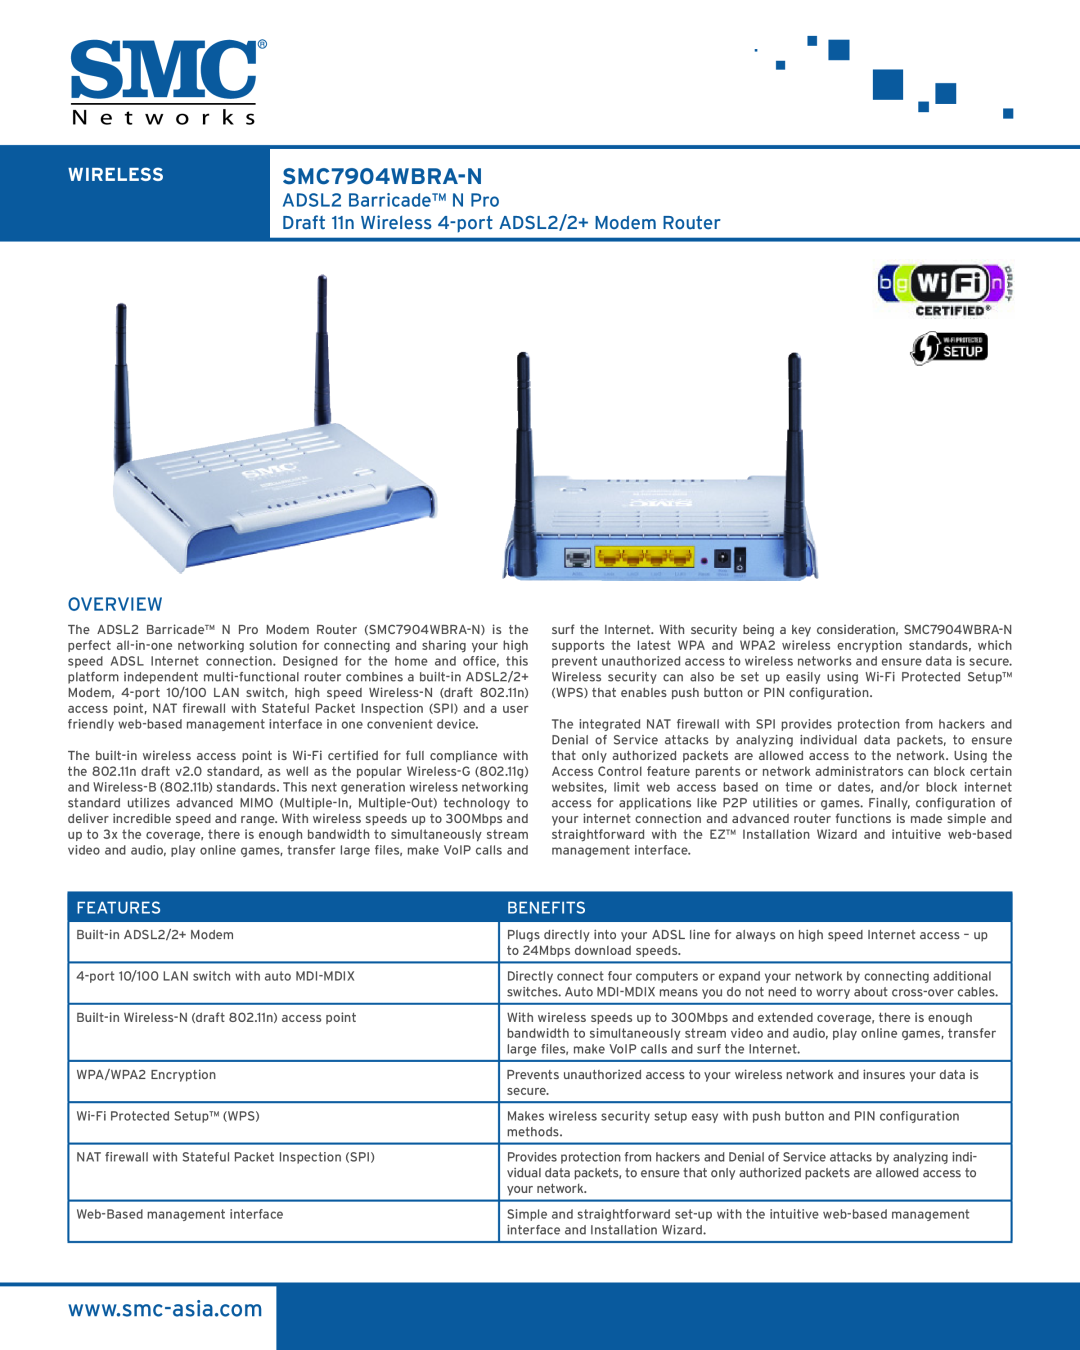 SMC Networks manual Features, Benefits, WIRELESSSMC7904WBRA-N, Overview 